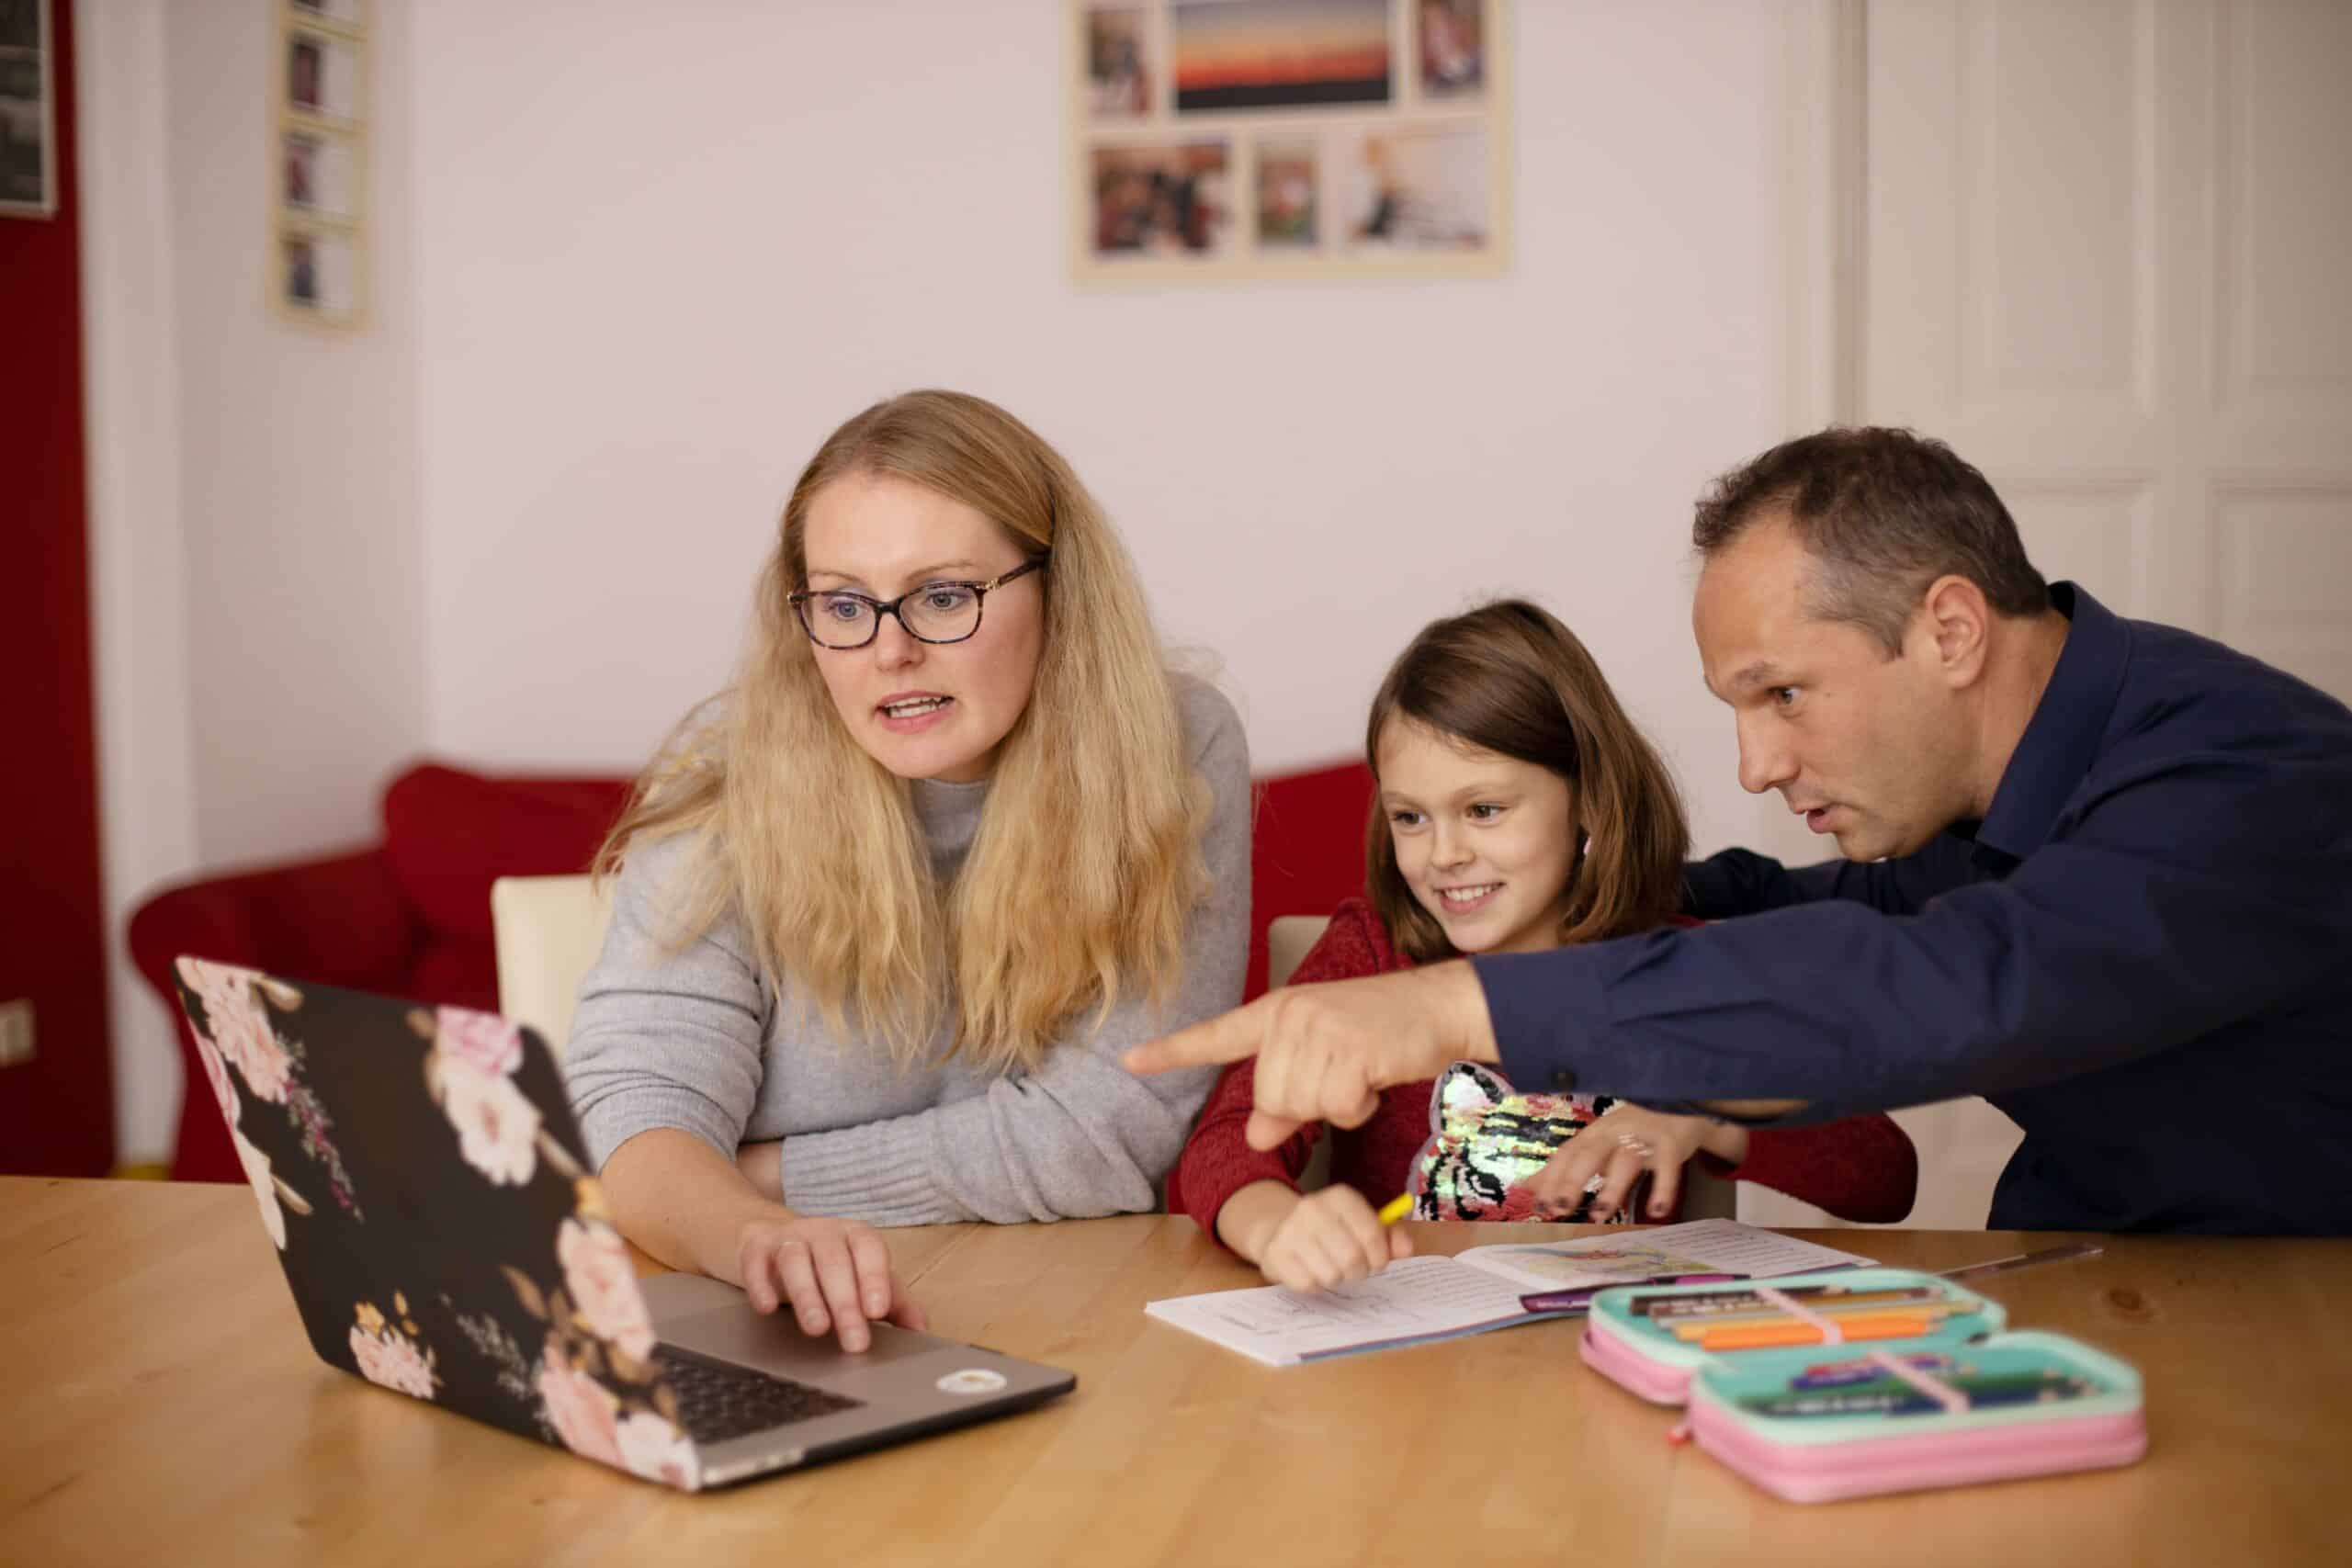 Woman, girl and man working together on a laptop on the desk homeschooling